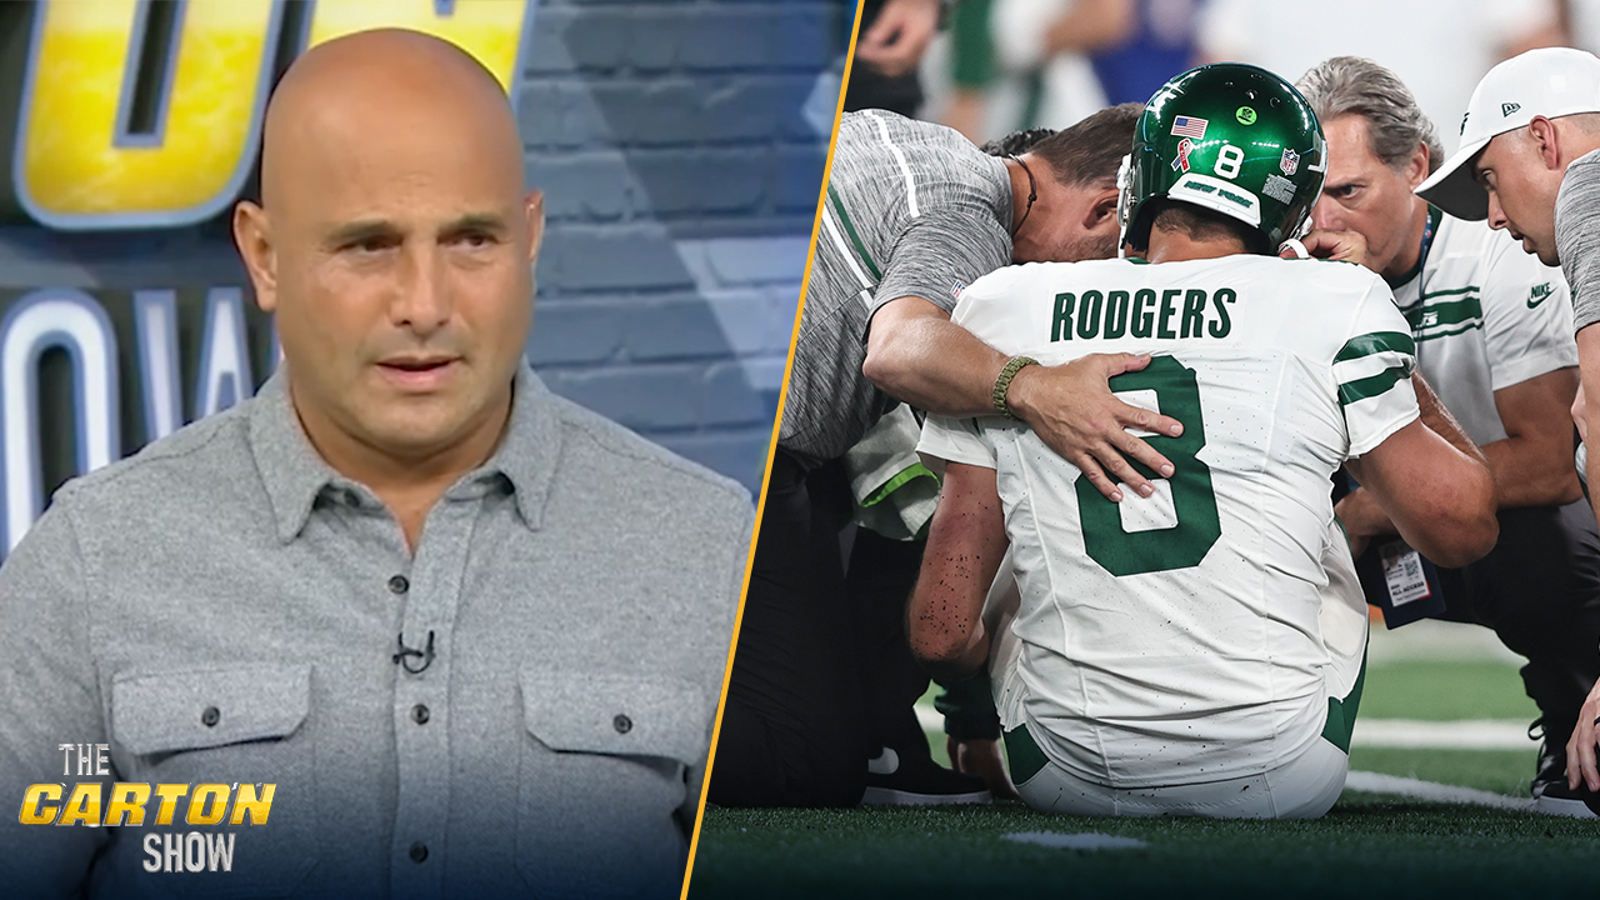 Aaron Rodgers ruled out for season with torn Achilles